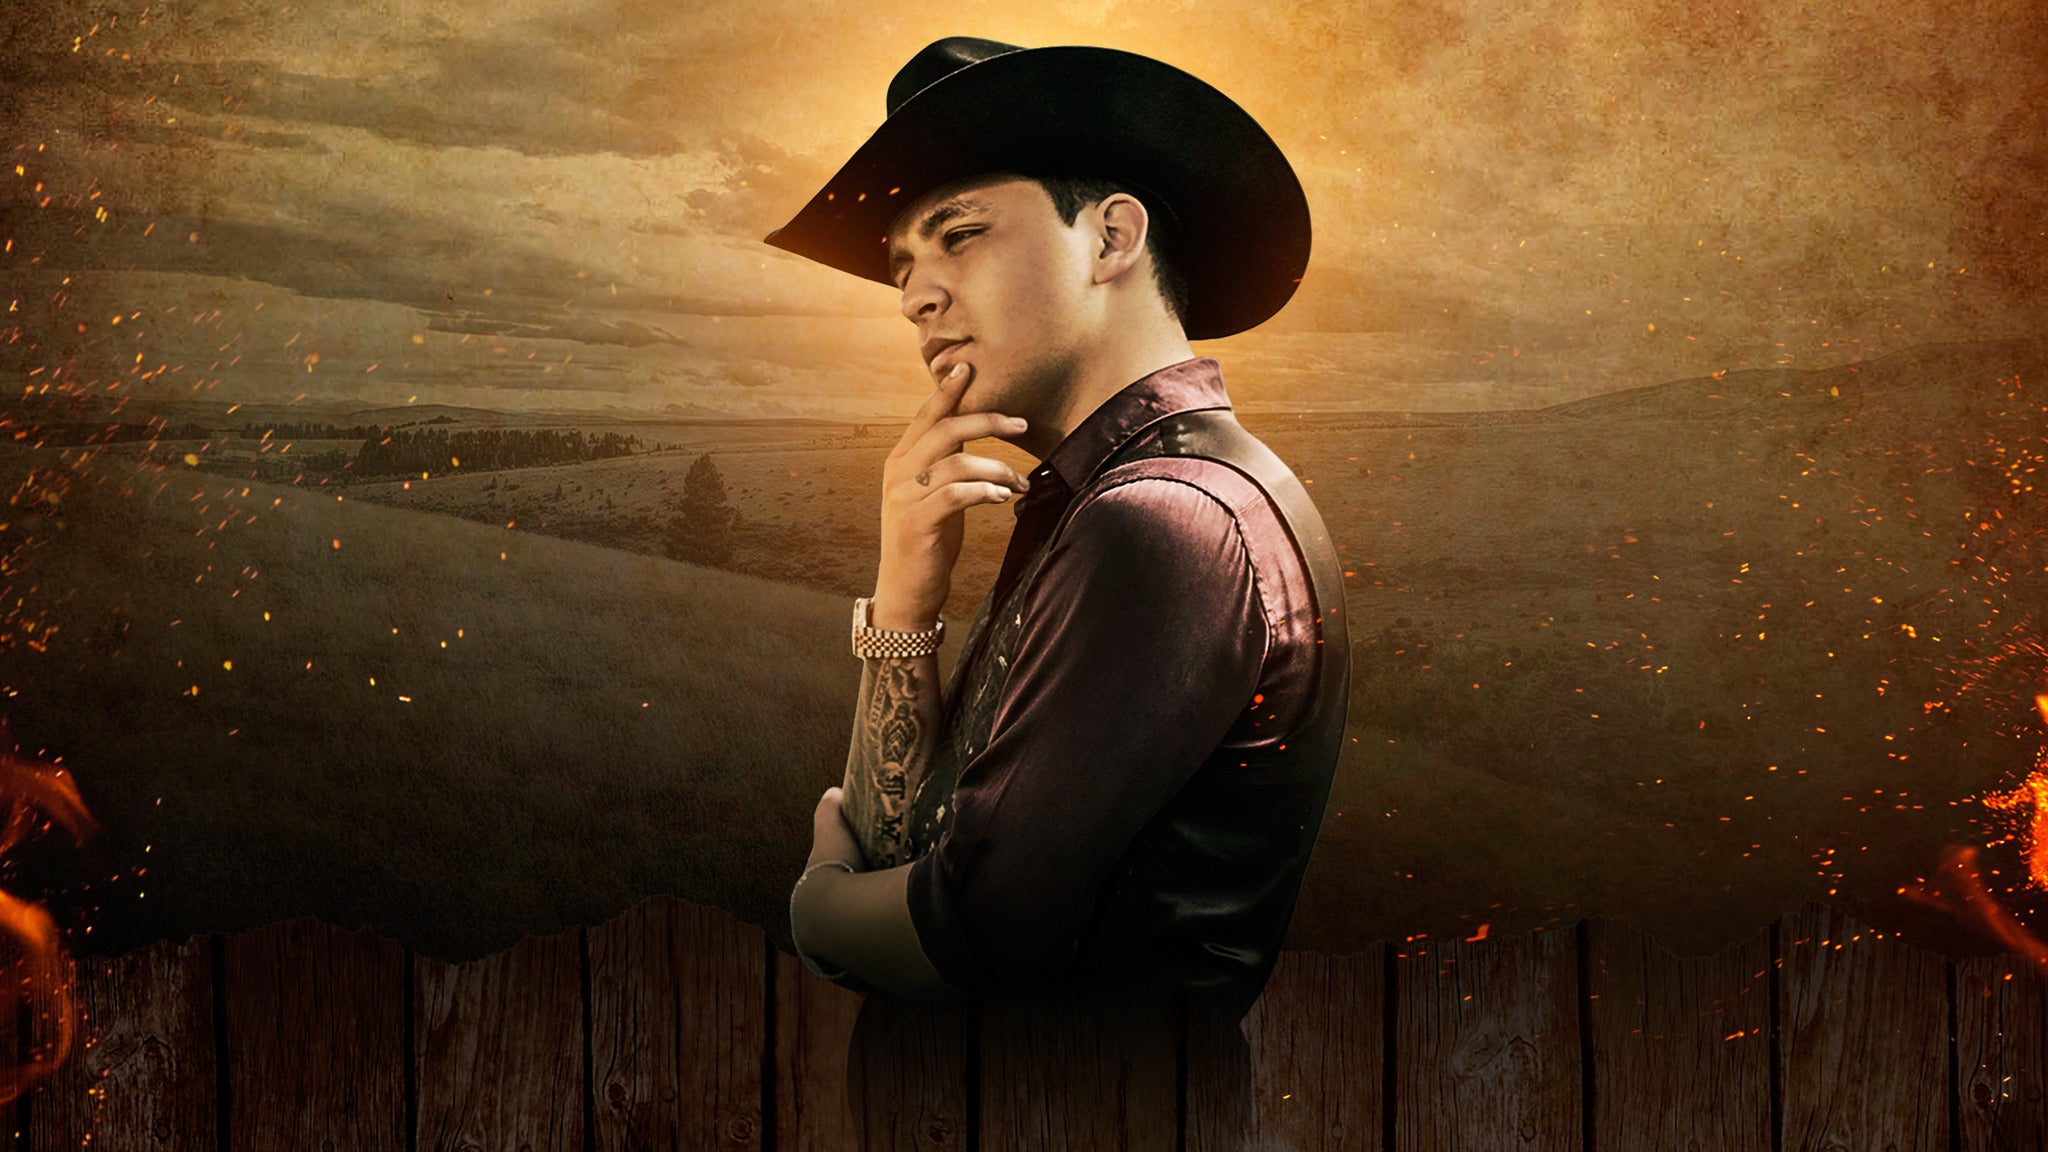 Christian Nodal in Kansas City promo photo for Exclusive presale offer code